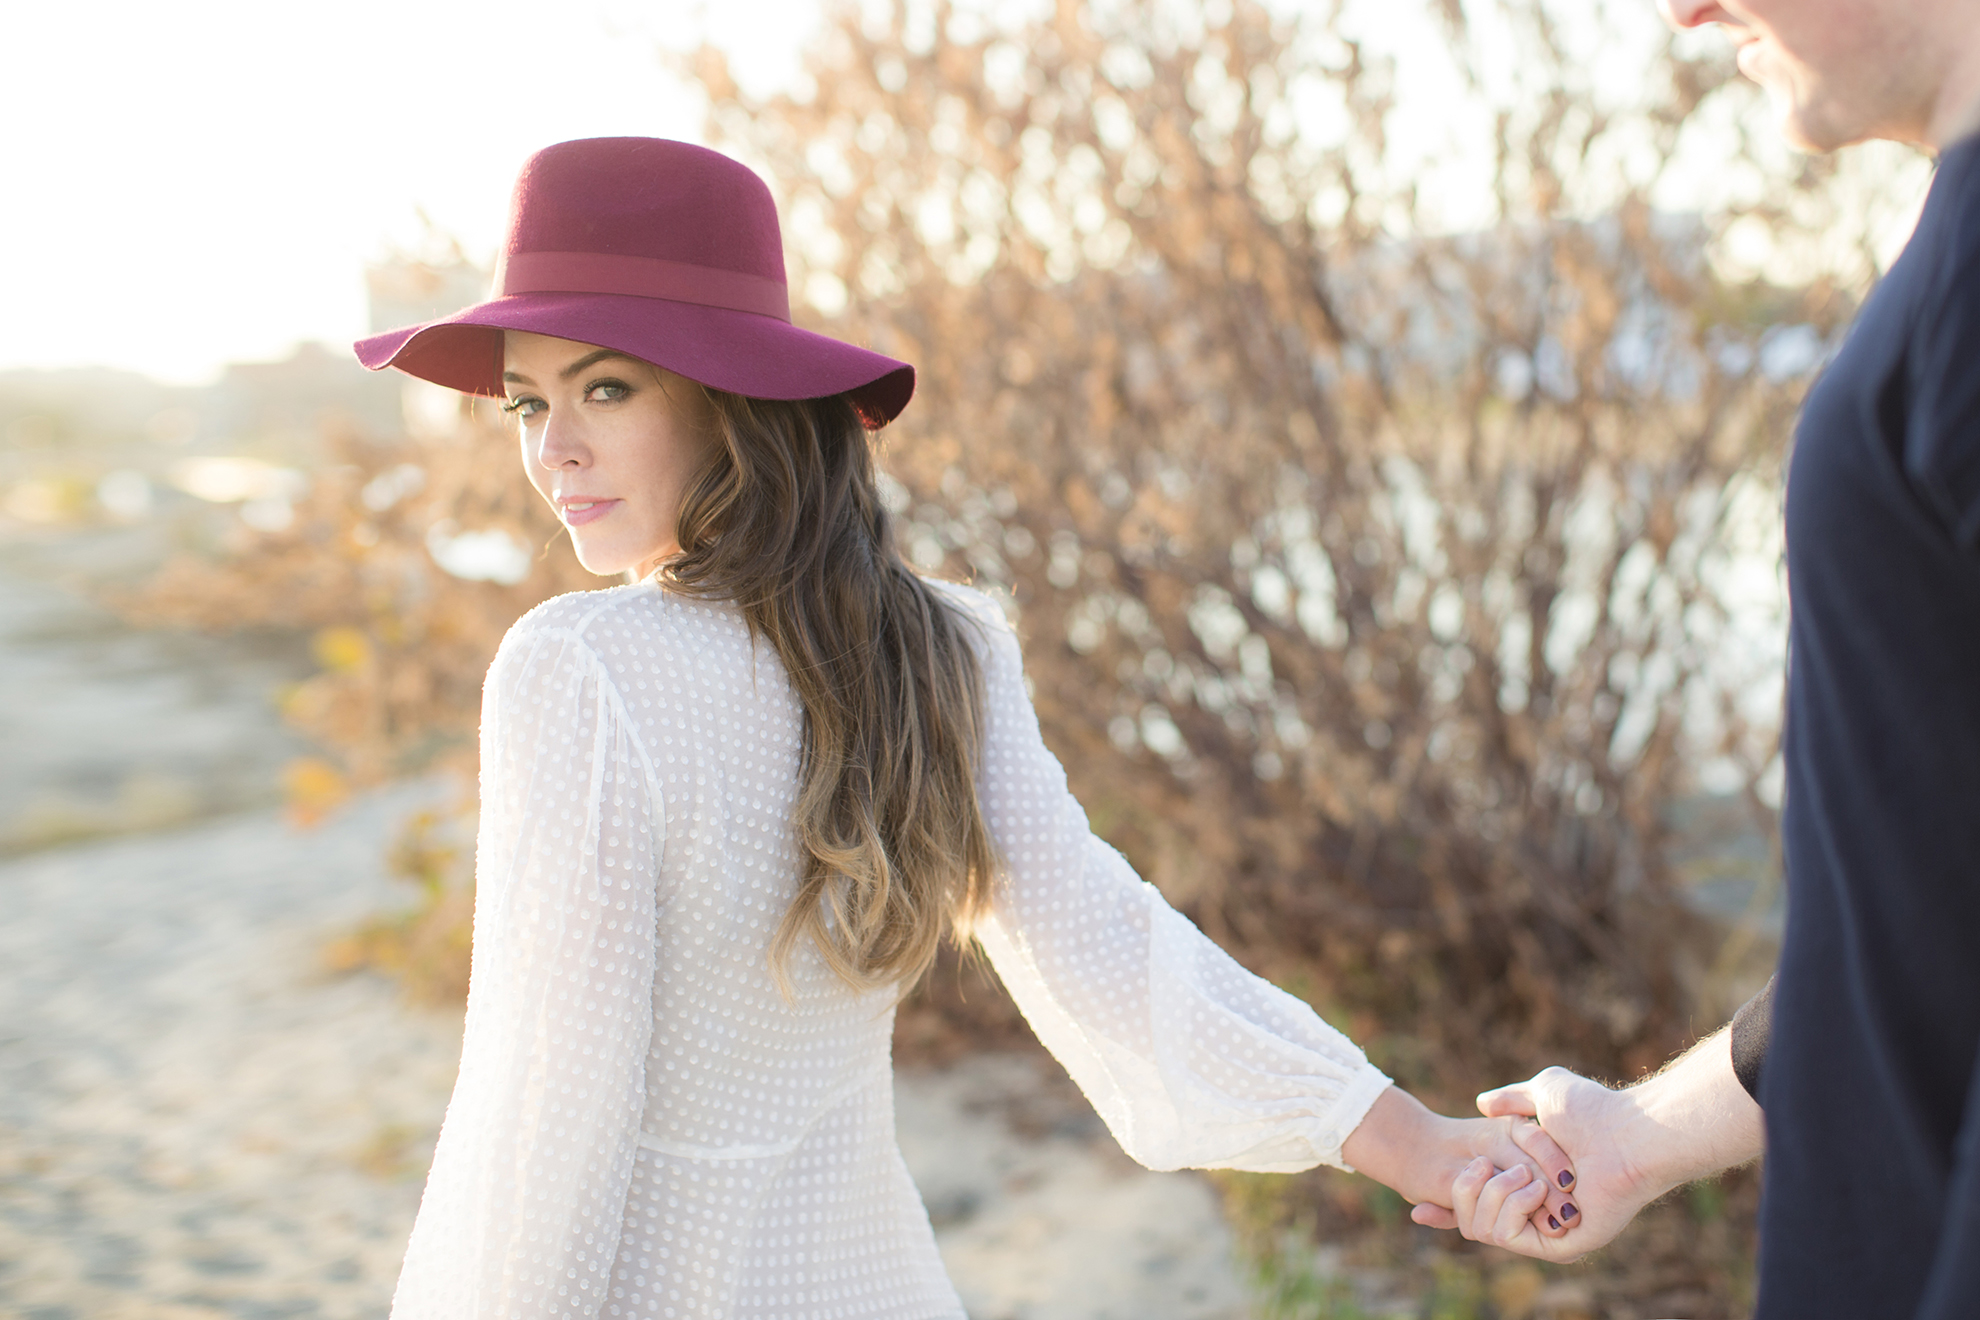 Image of a woman on the beach in a red brimmed hat and white blouse holding her partner's hand while looking back at the camera